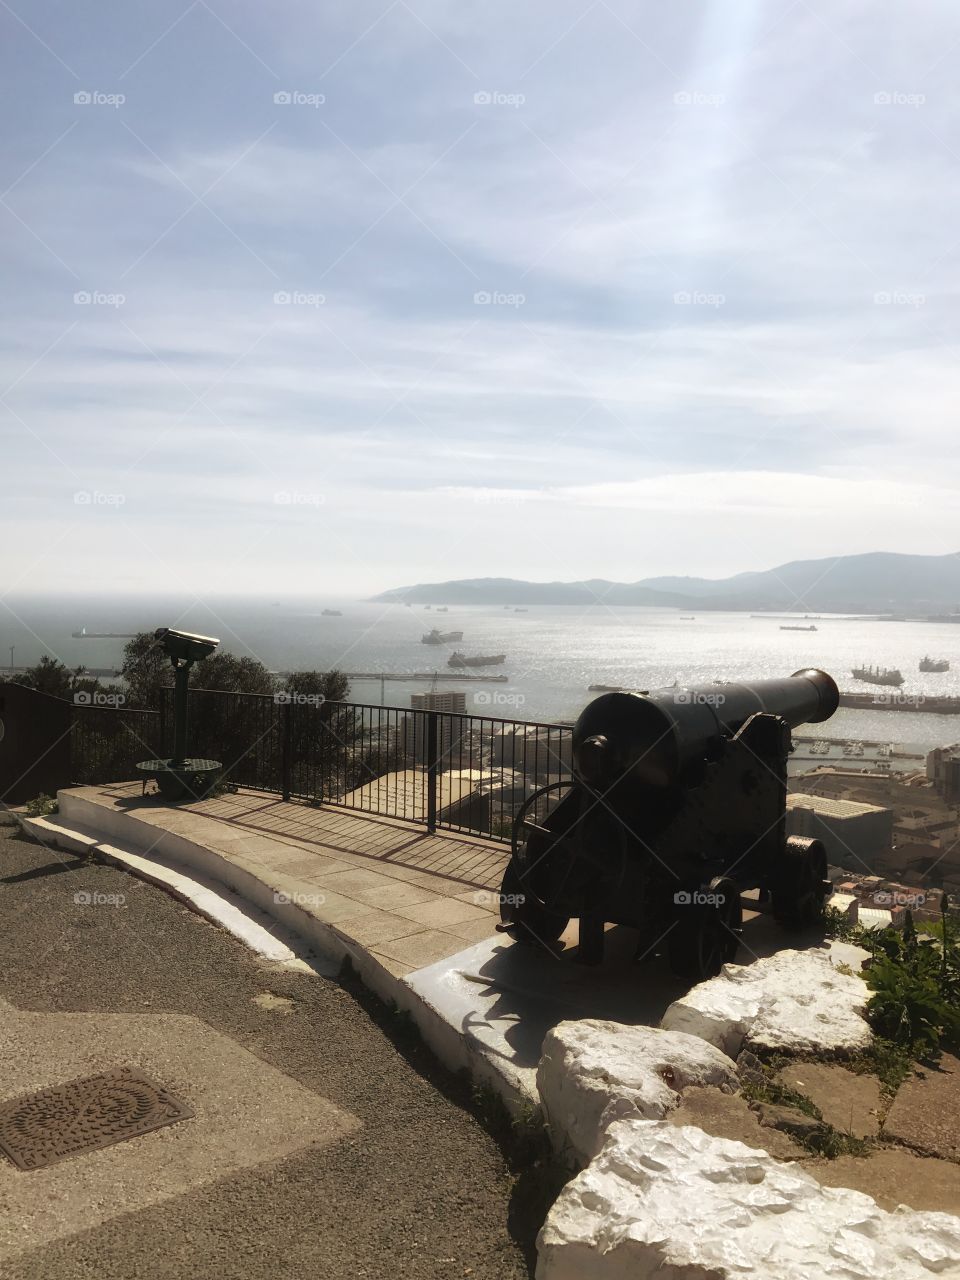 History of Gibraltar, cannons, views, 